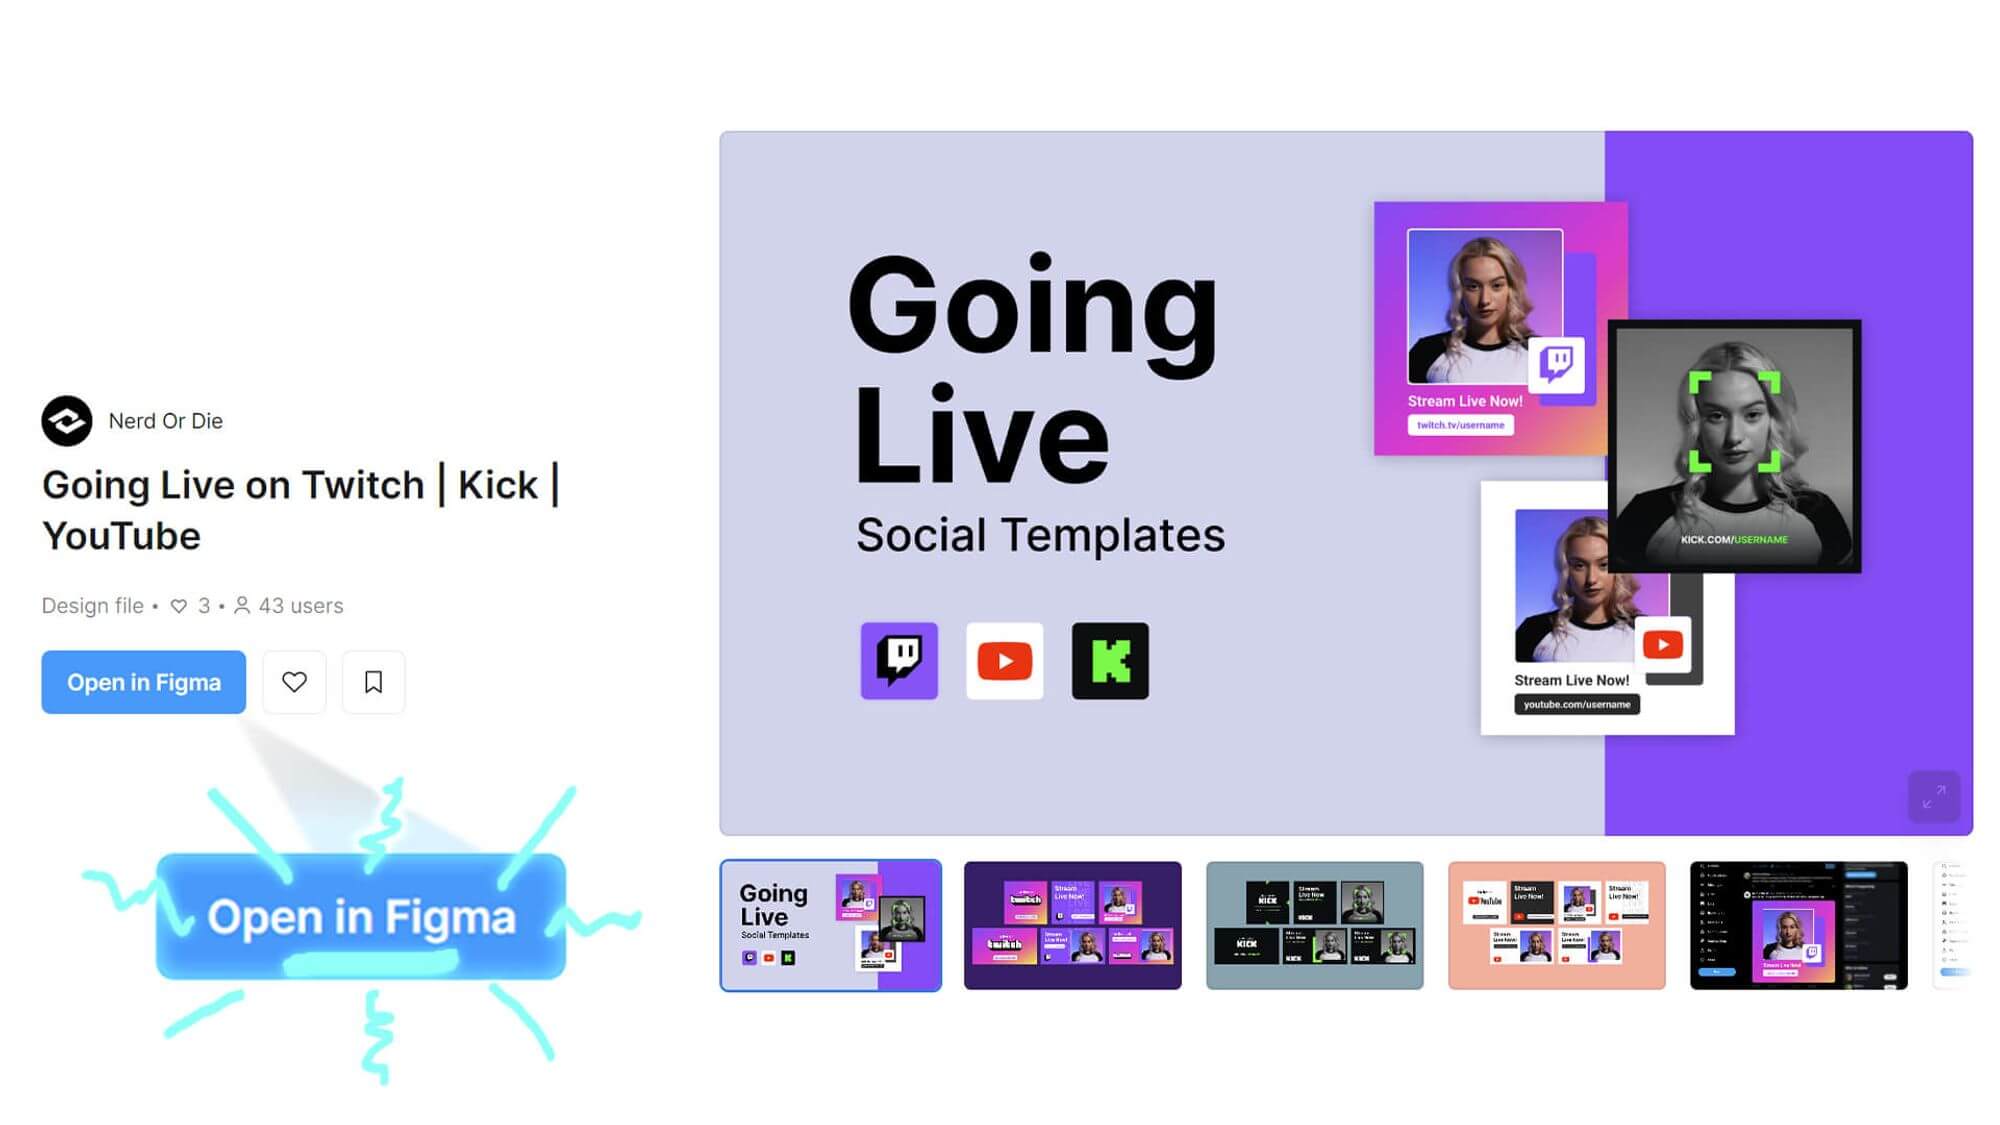 Going Live on Twitch, Kick and YouTube template on Figma community.